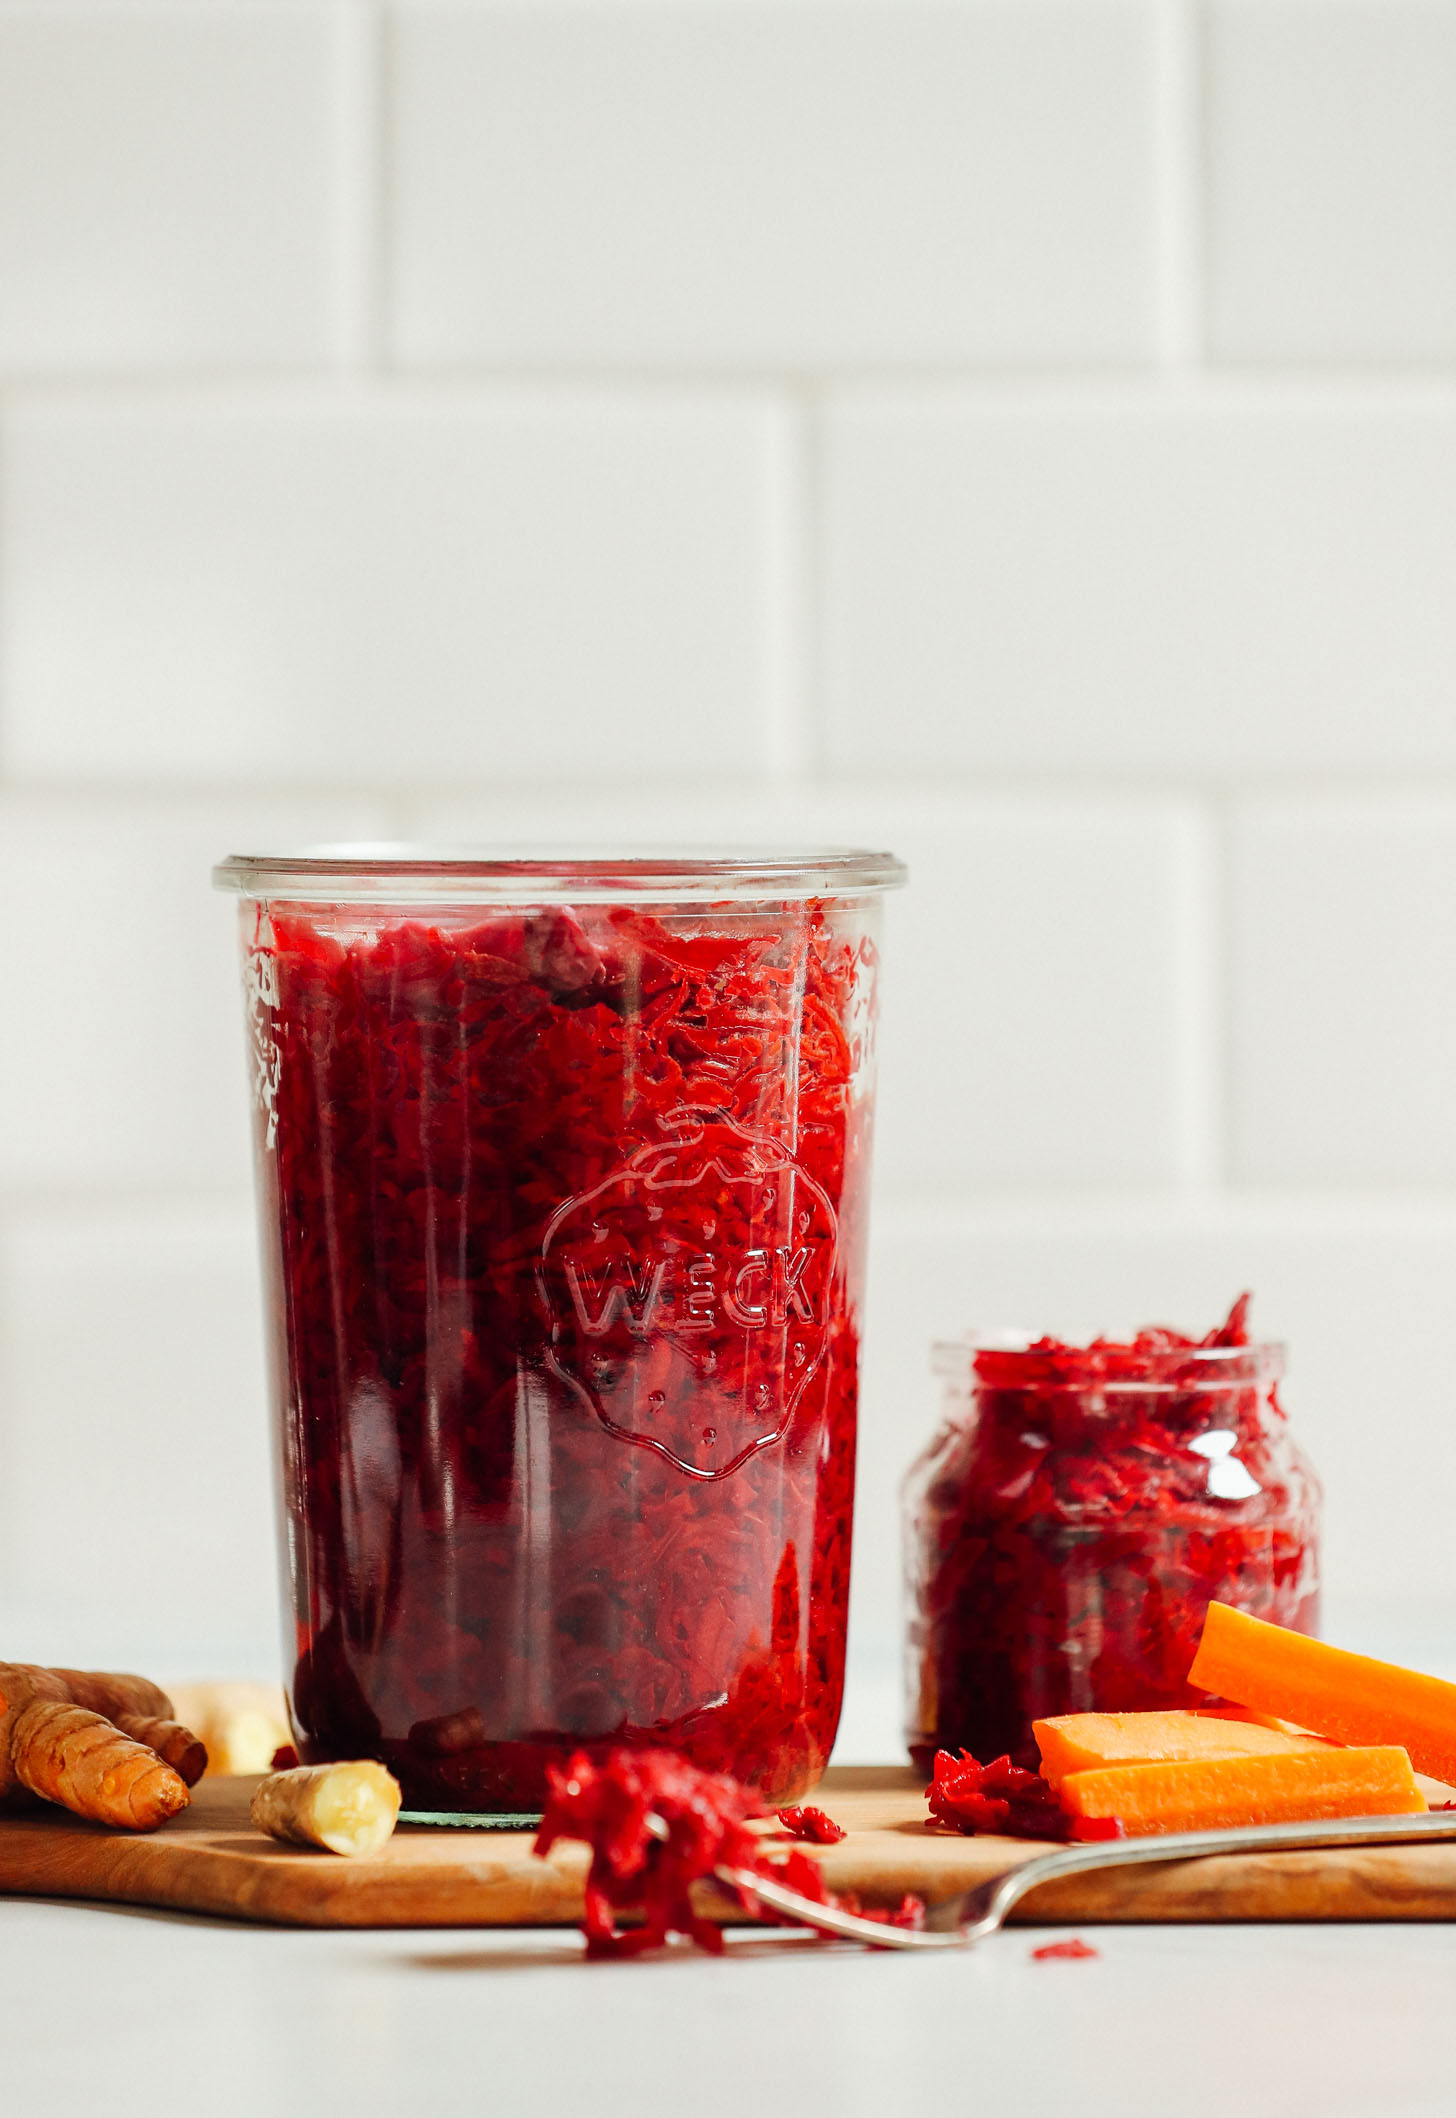 Canning Recipes Post: Bright red and jarred sauerkraut 